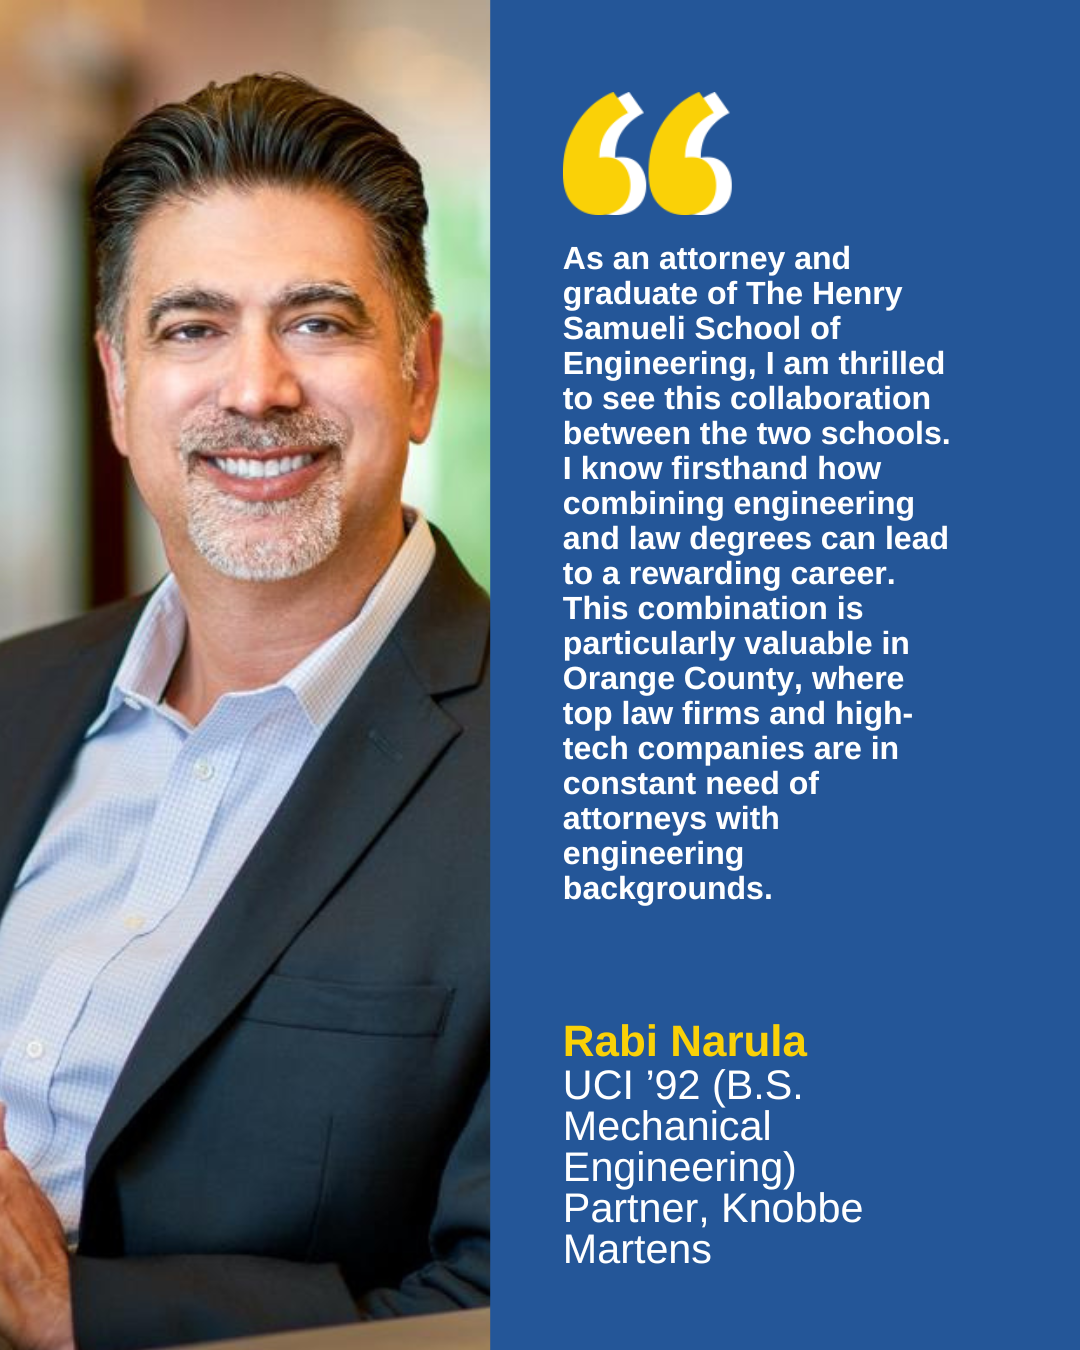 As an attorney and graduate of The Henry Samueli School of Engineering, I am thrilled to see this collaboration between the two schools. I know firsthand how combining engineering and law degrees can lead to a rewarding career.  This combination is particularly valuable in Orange County, where top law firms and high-tech companies are in constant need of attorneys with engineering backgrounds.  - Rabi Narula   UCI '92 (B.S. Mechanical Engineering)   Partner, Knobbe Martens